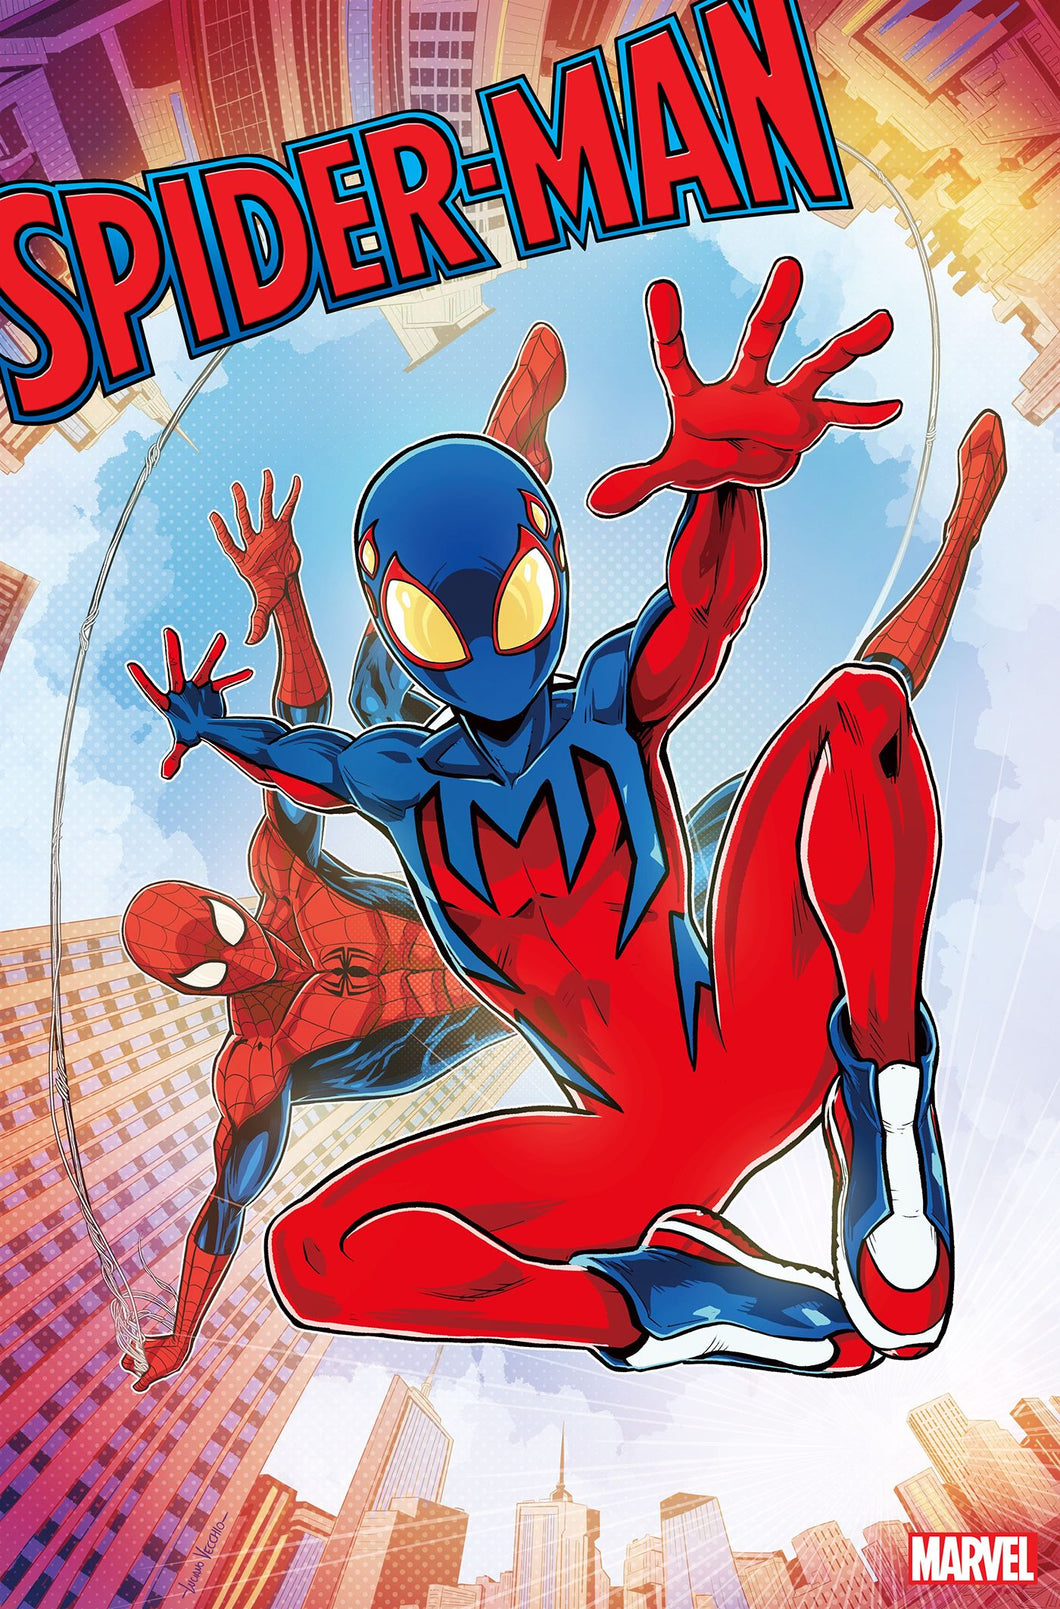 SPIDER-MAN #7 - 2ND PRINT (LUCIANO VECCHIO VARIANT)